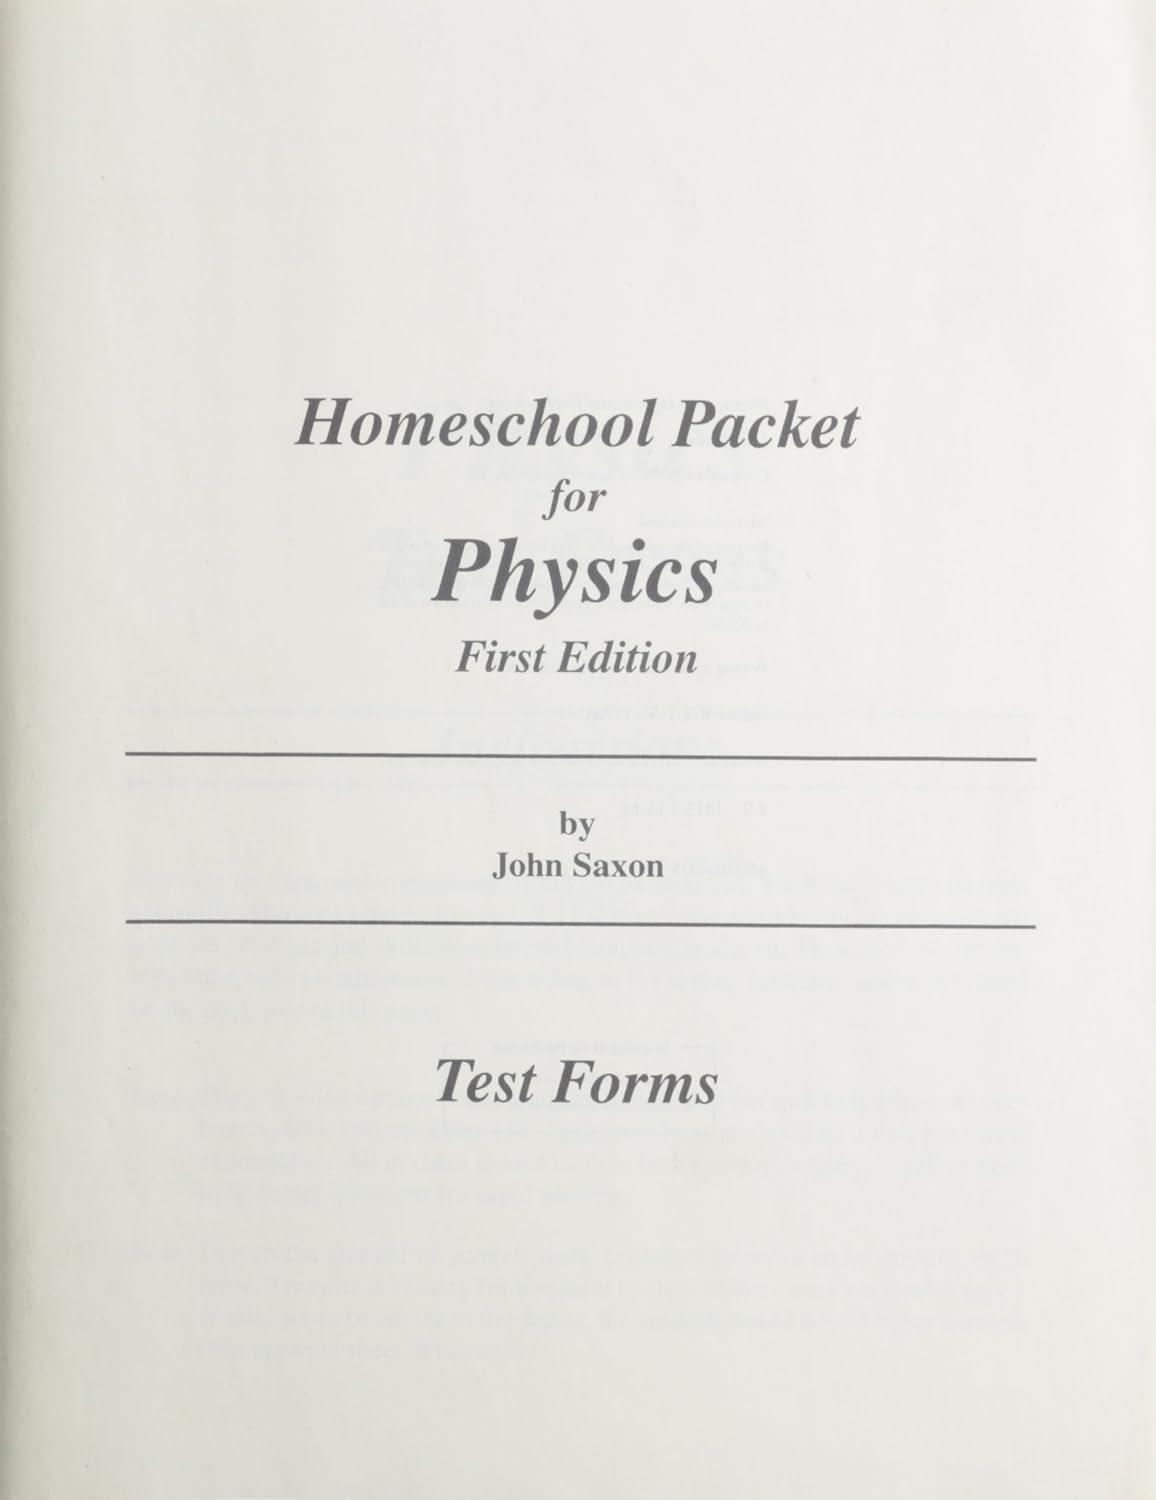 home school packet for physics test forms 1st edition john saxon 1565770854, 978-1565770850